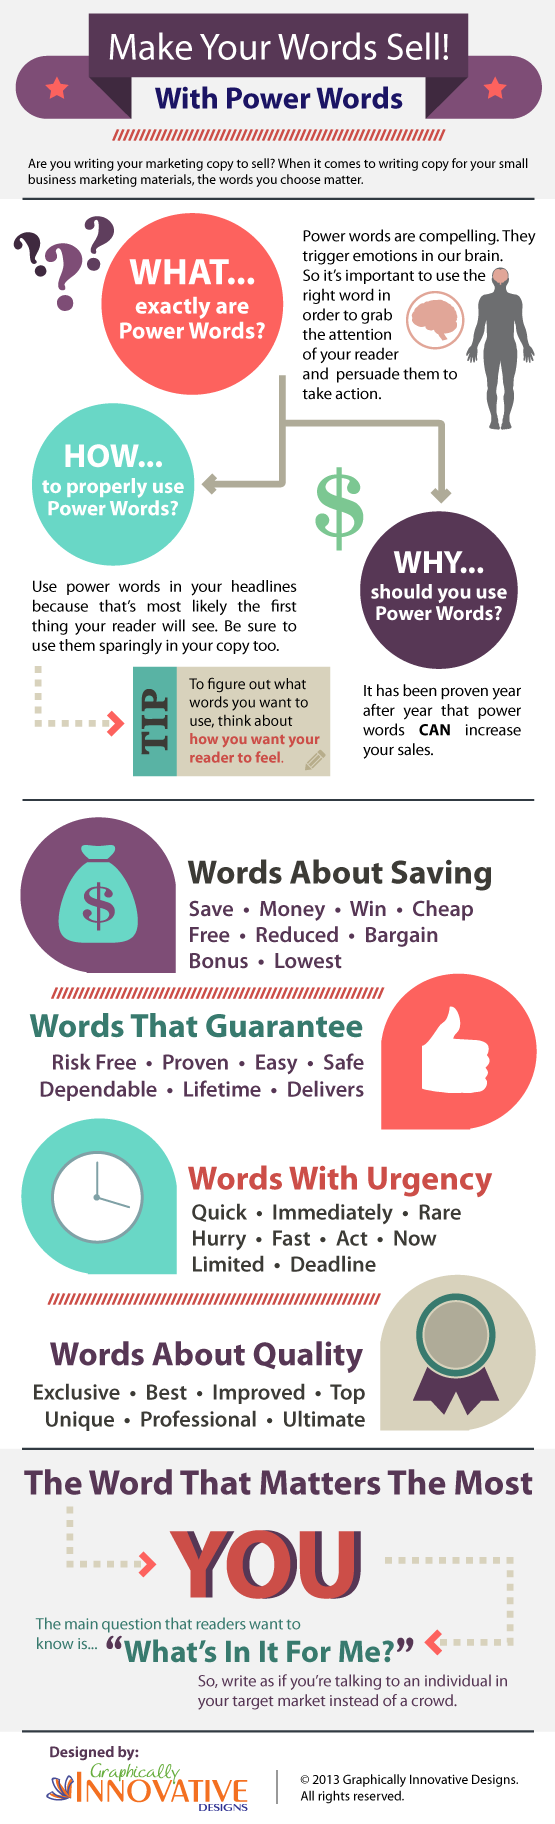 Making Your Words Sell with Power Words Infographic